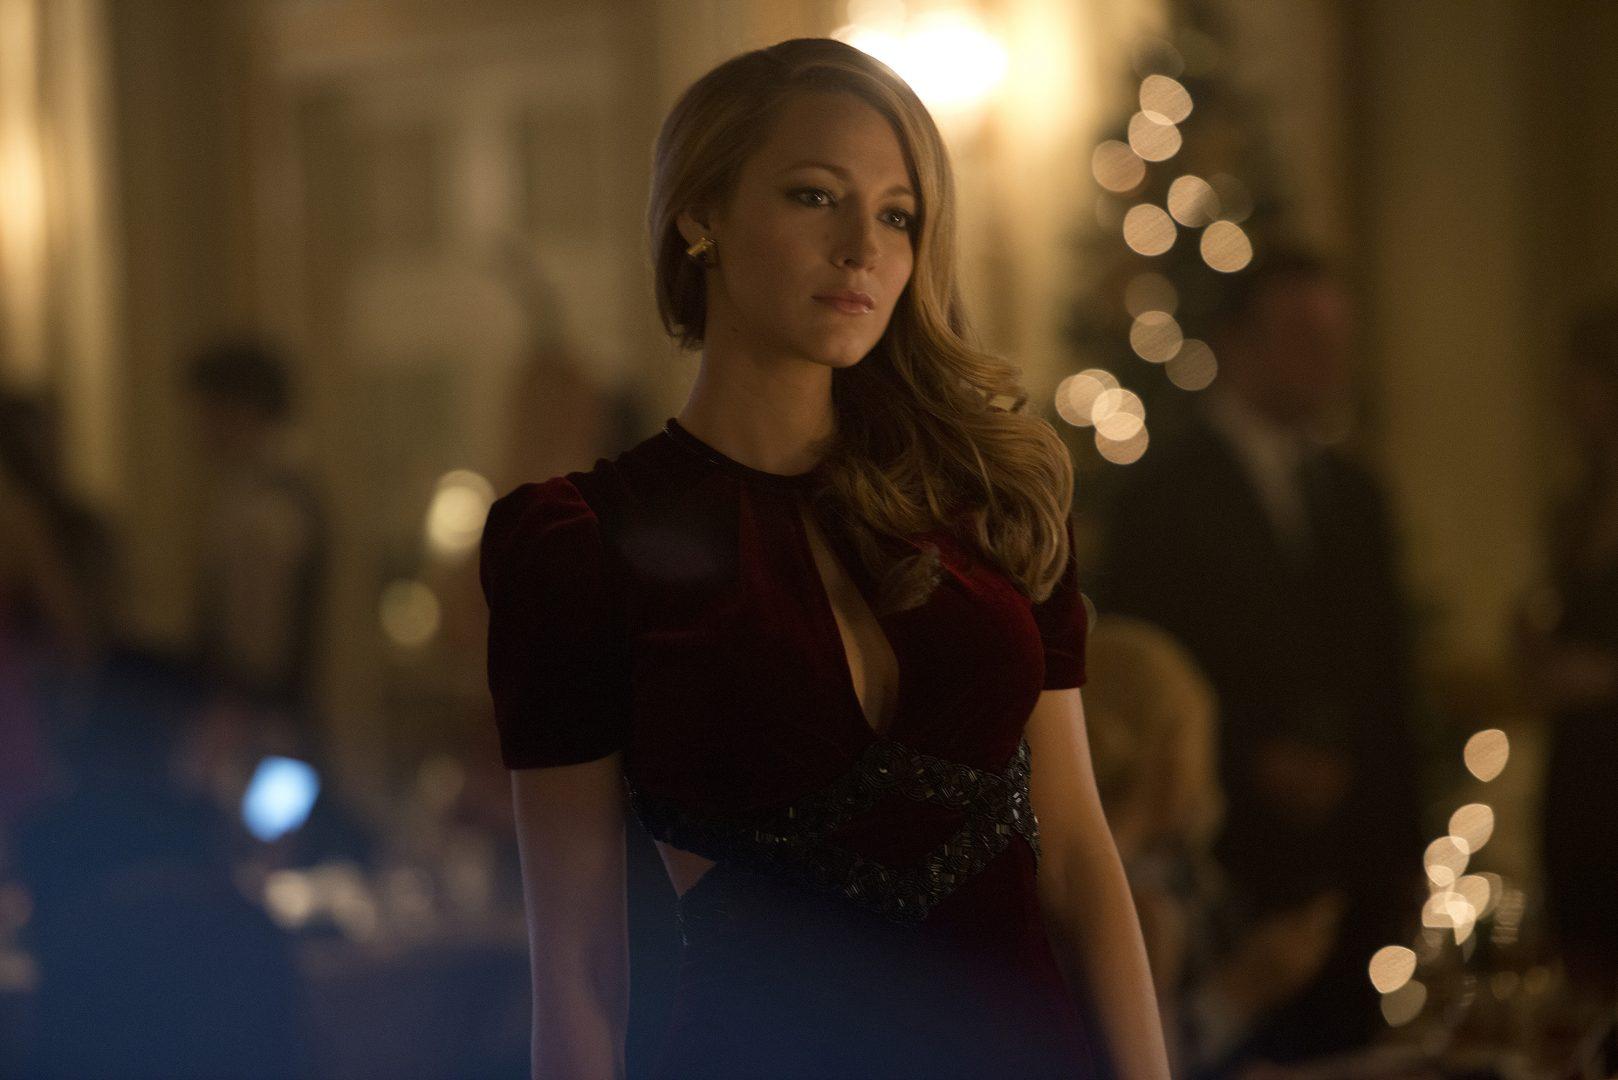 Blake+Lively+stars+in+The+Age+of+Adaline.+%28Diyah+Pera%2FLionsgate%29